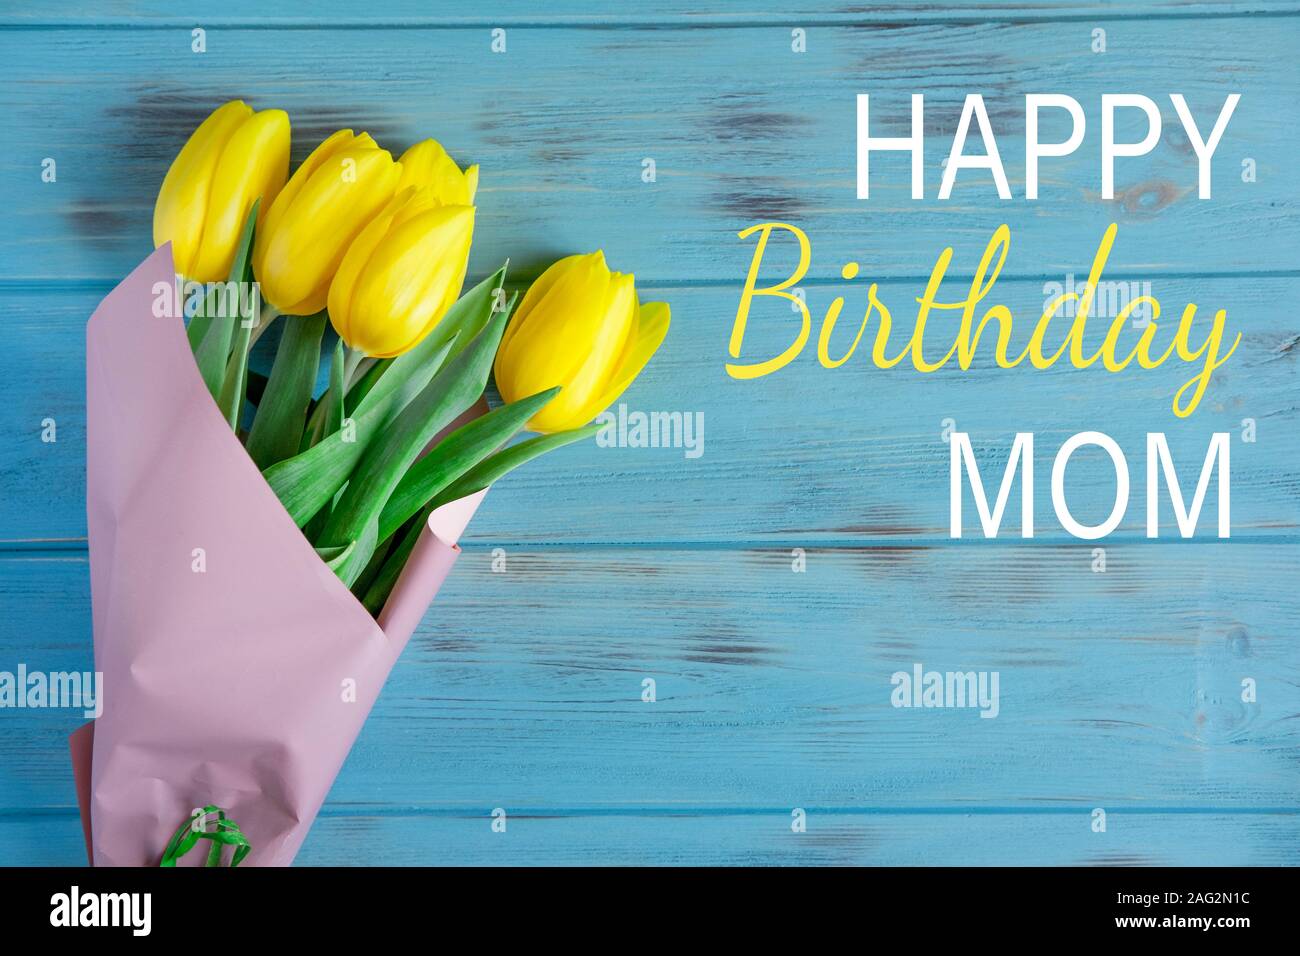 Happy birthday mom. Greeting card design for mom's birthday with a ...